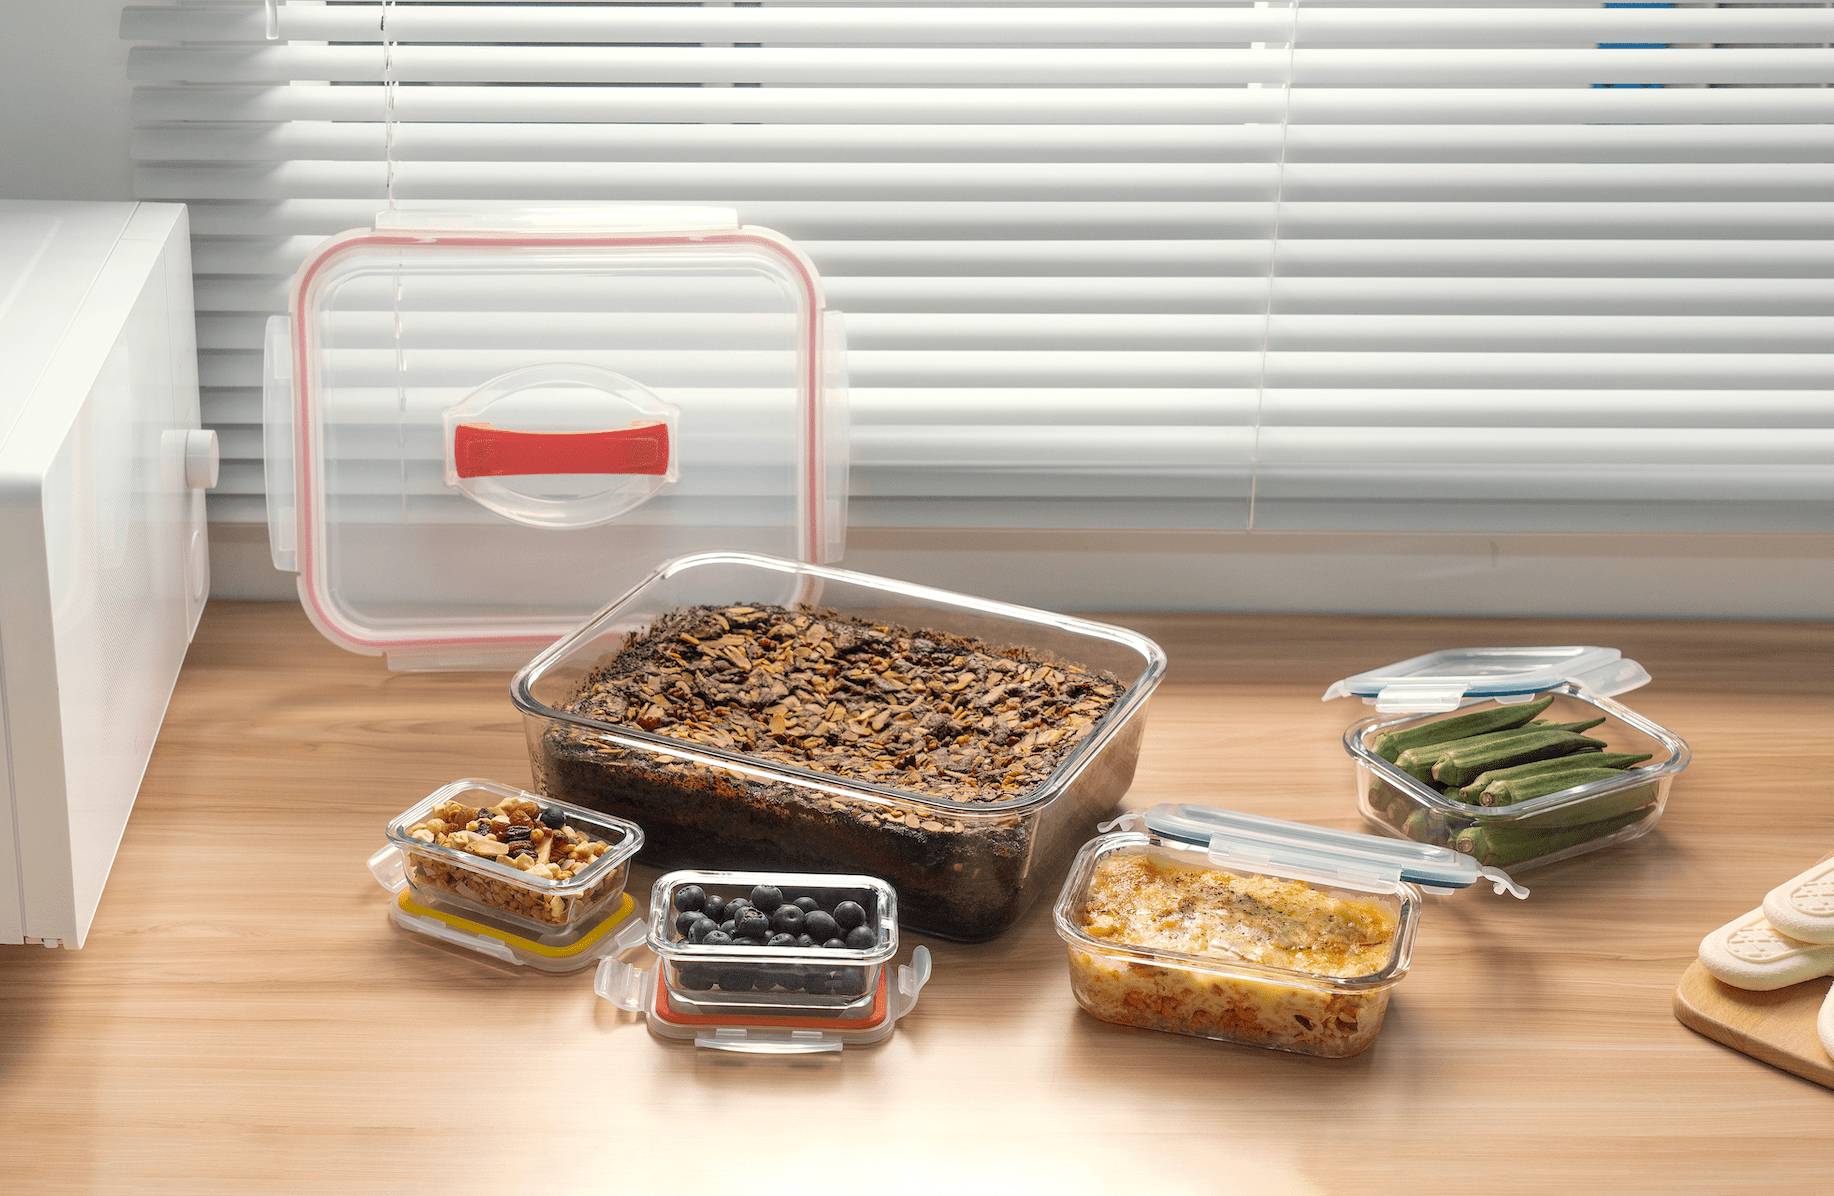 Rubbermaid Brilliance 10-pc. Glass Food Storage Container Set